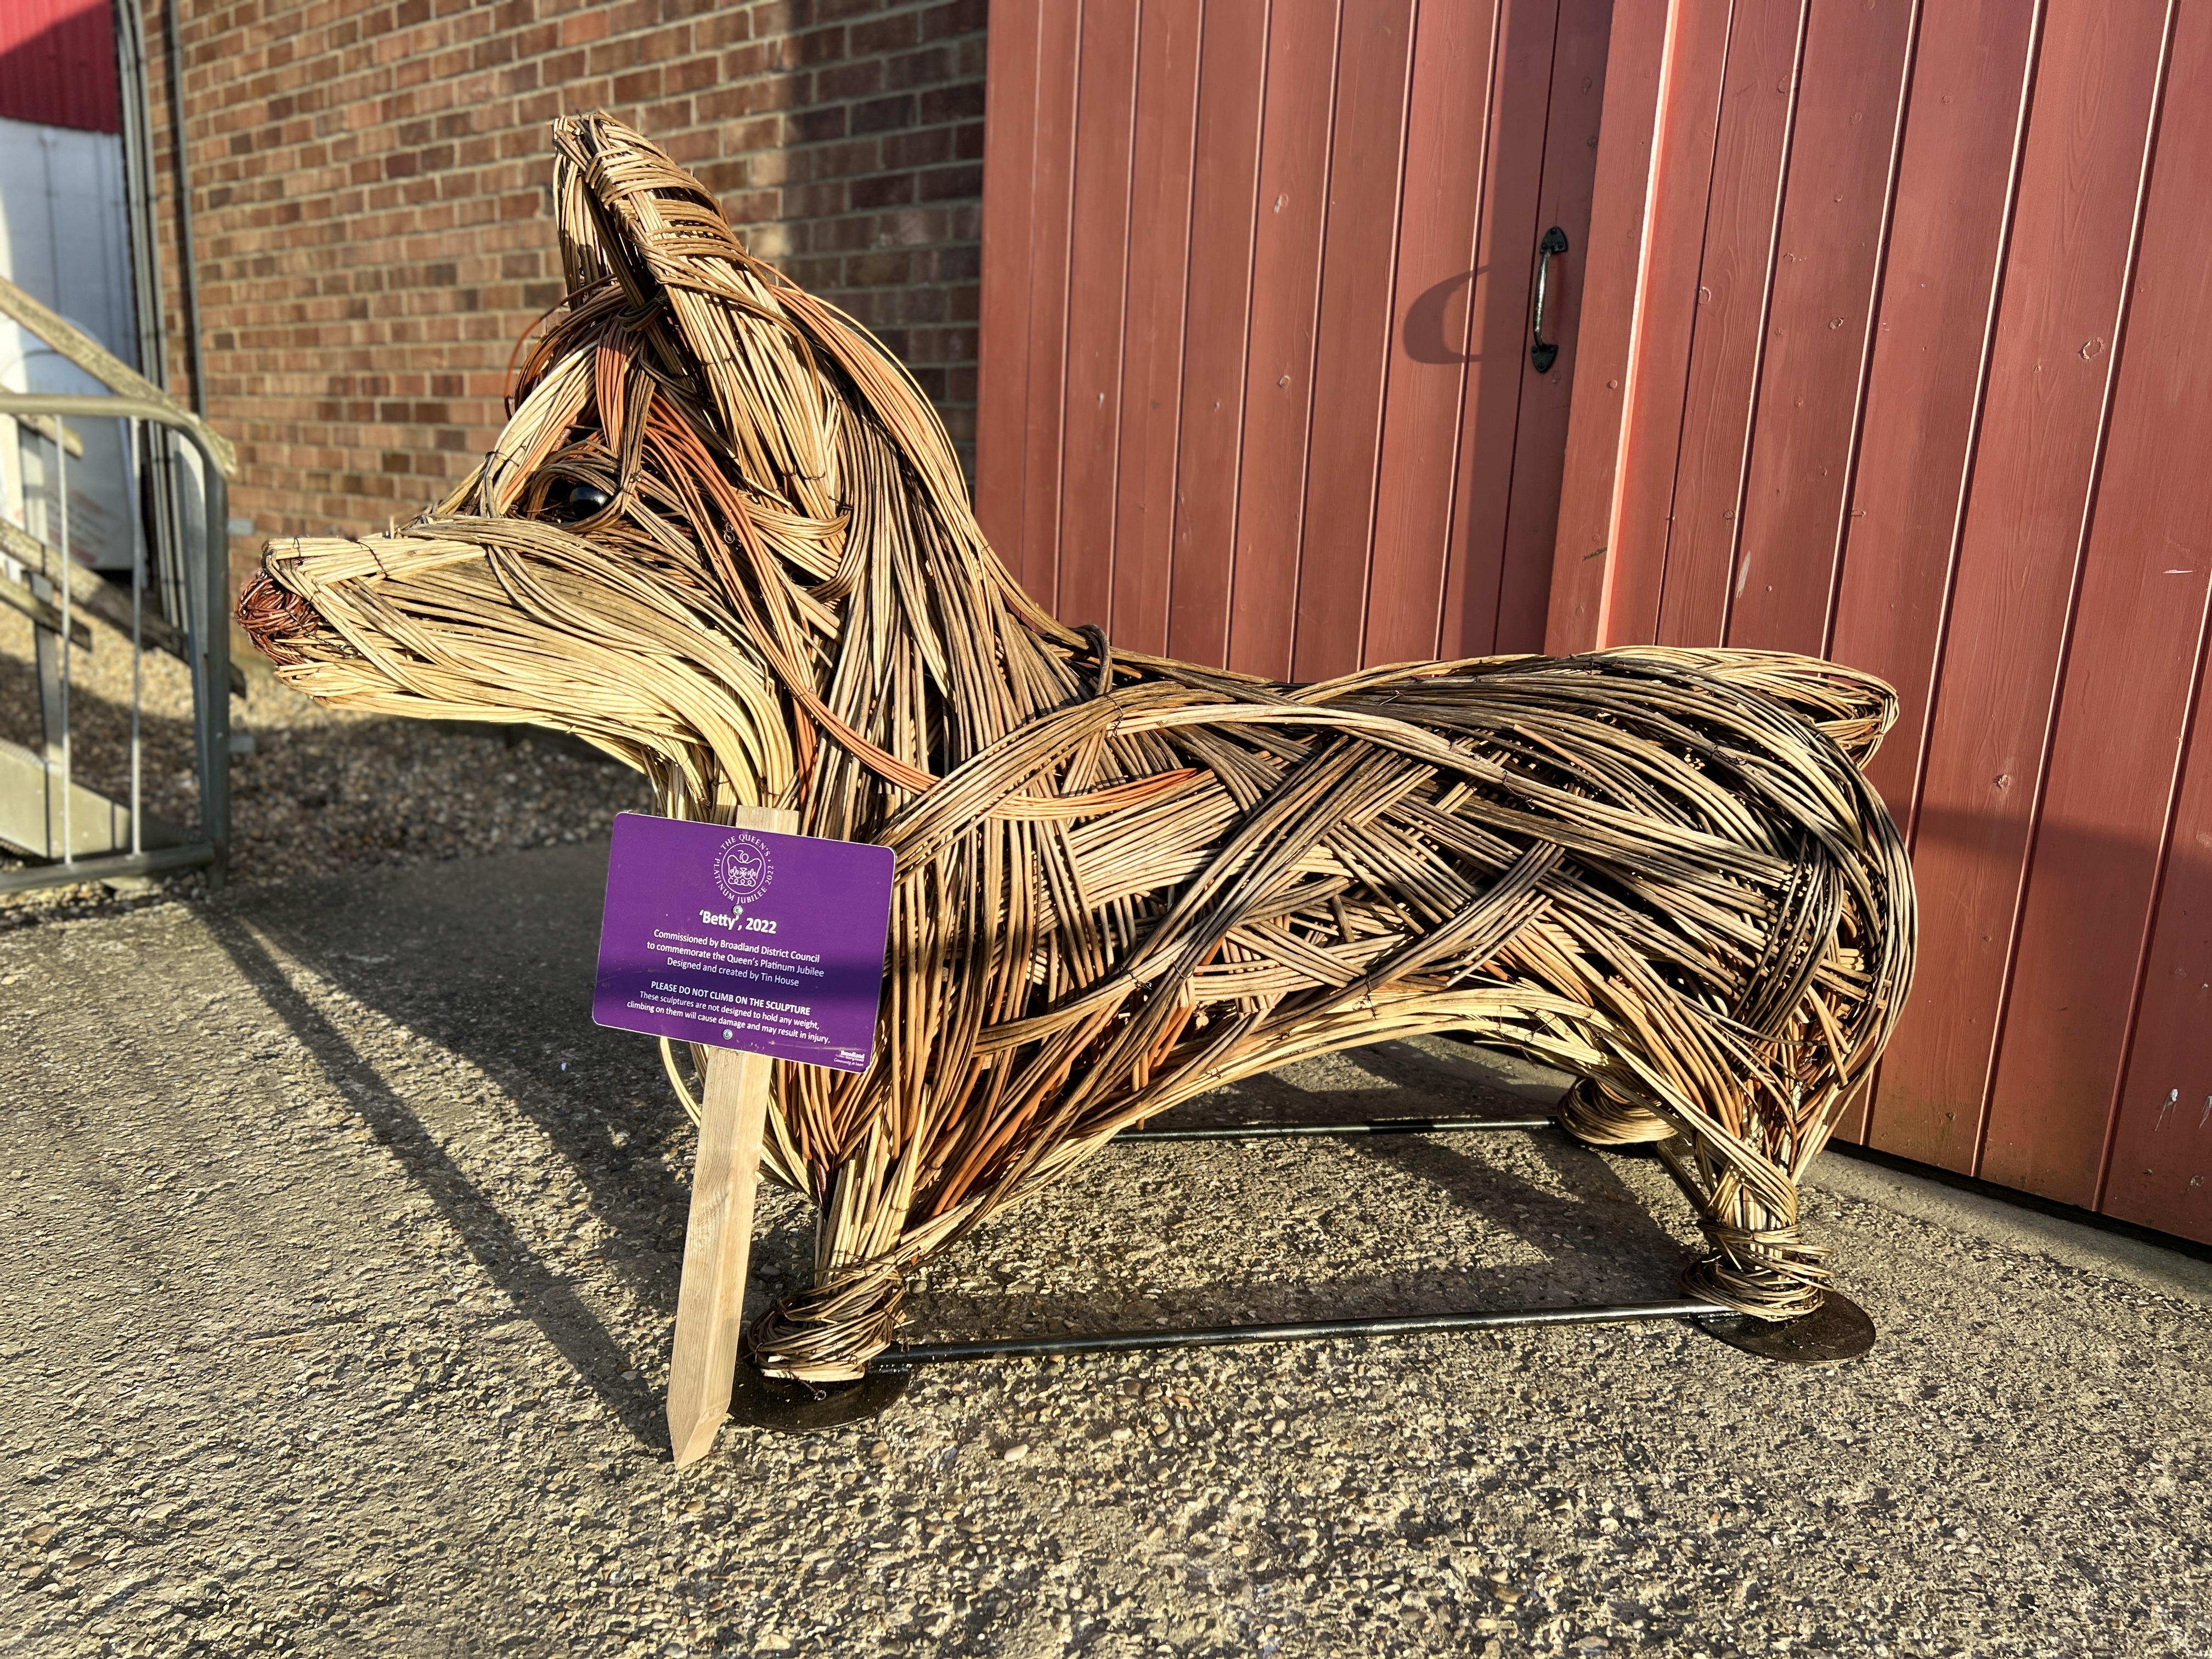 A TIN HOUSE OVERSIZE WILLOW CORGI SCULPTURE BY ALI MACKENZIE "BETTY" No. - Image 5 of 11